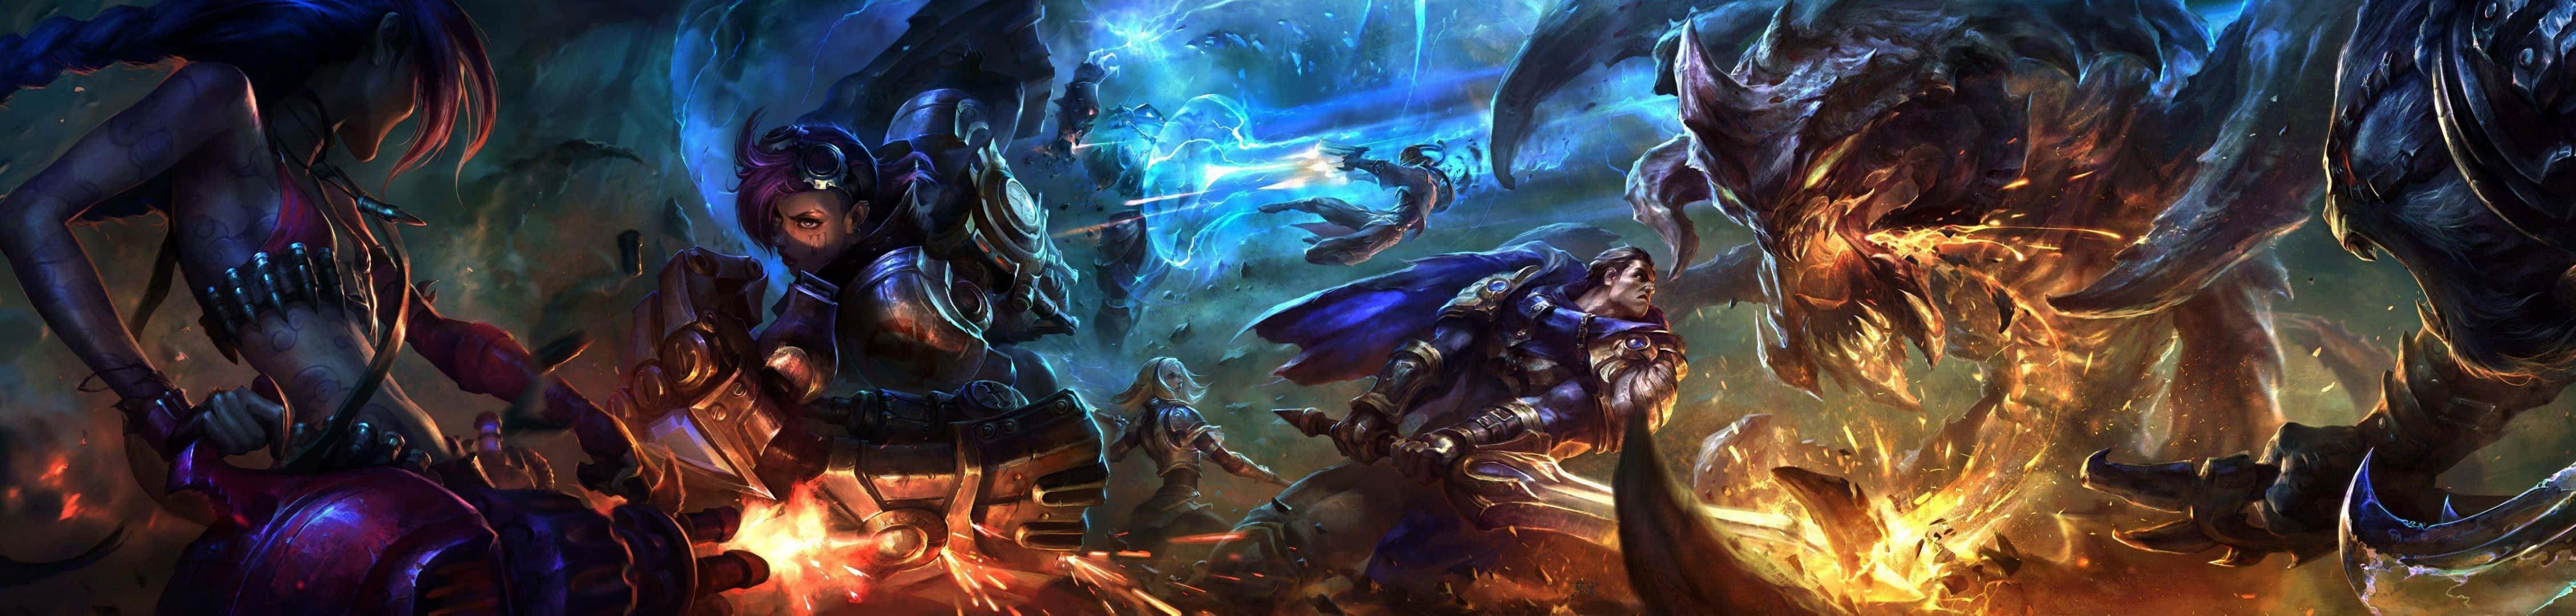 Join the Battle with League Of Legends Wallpaper